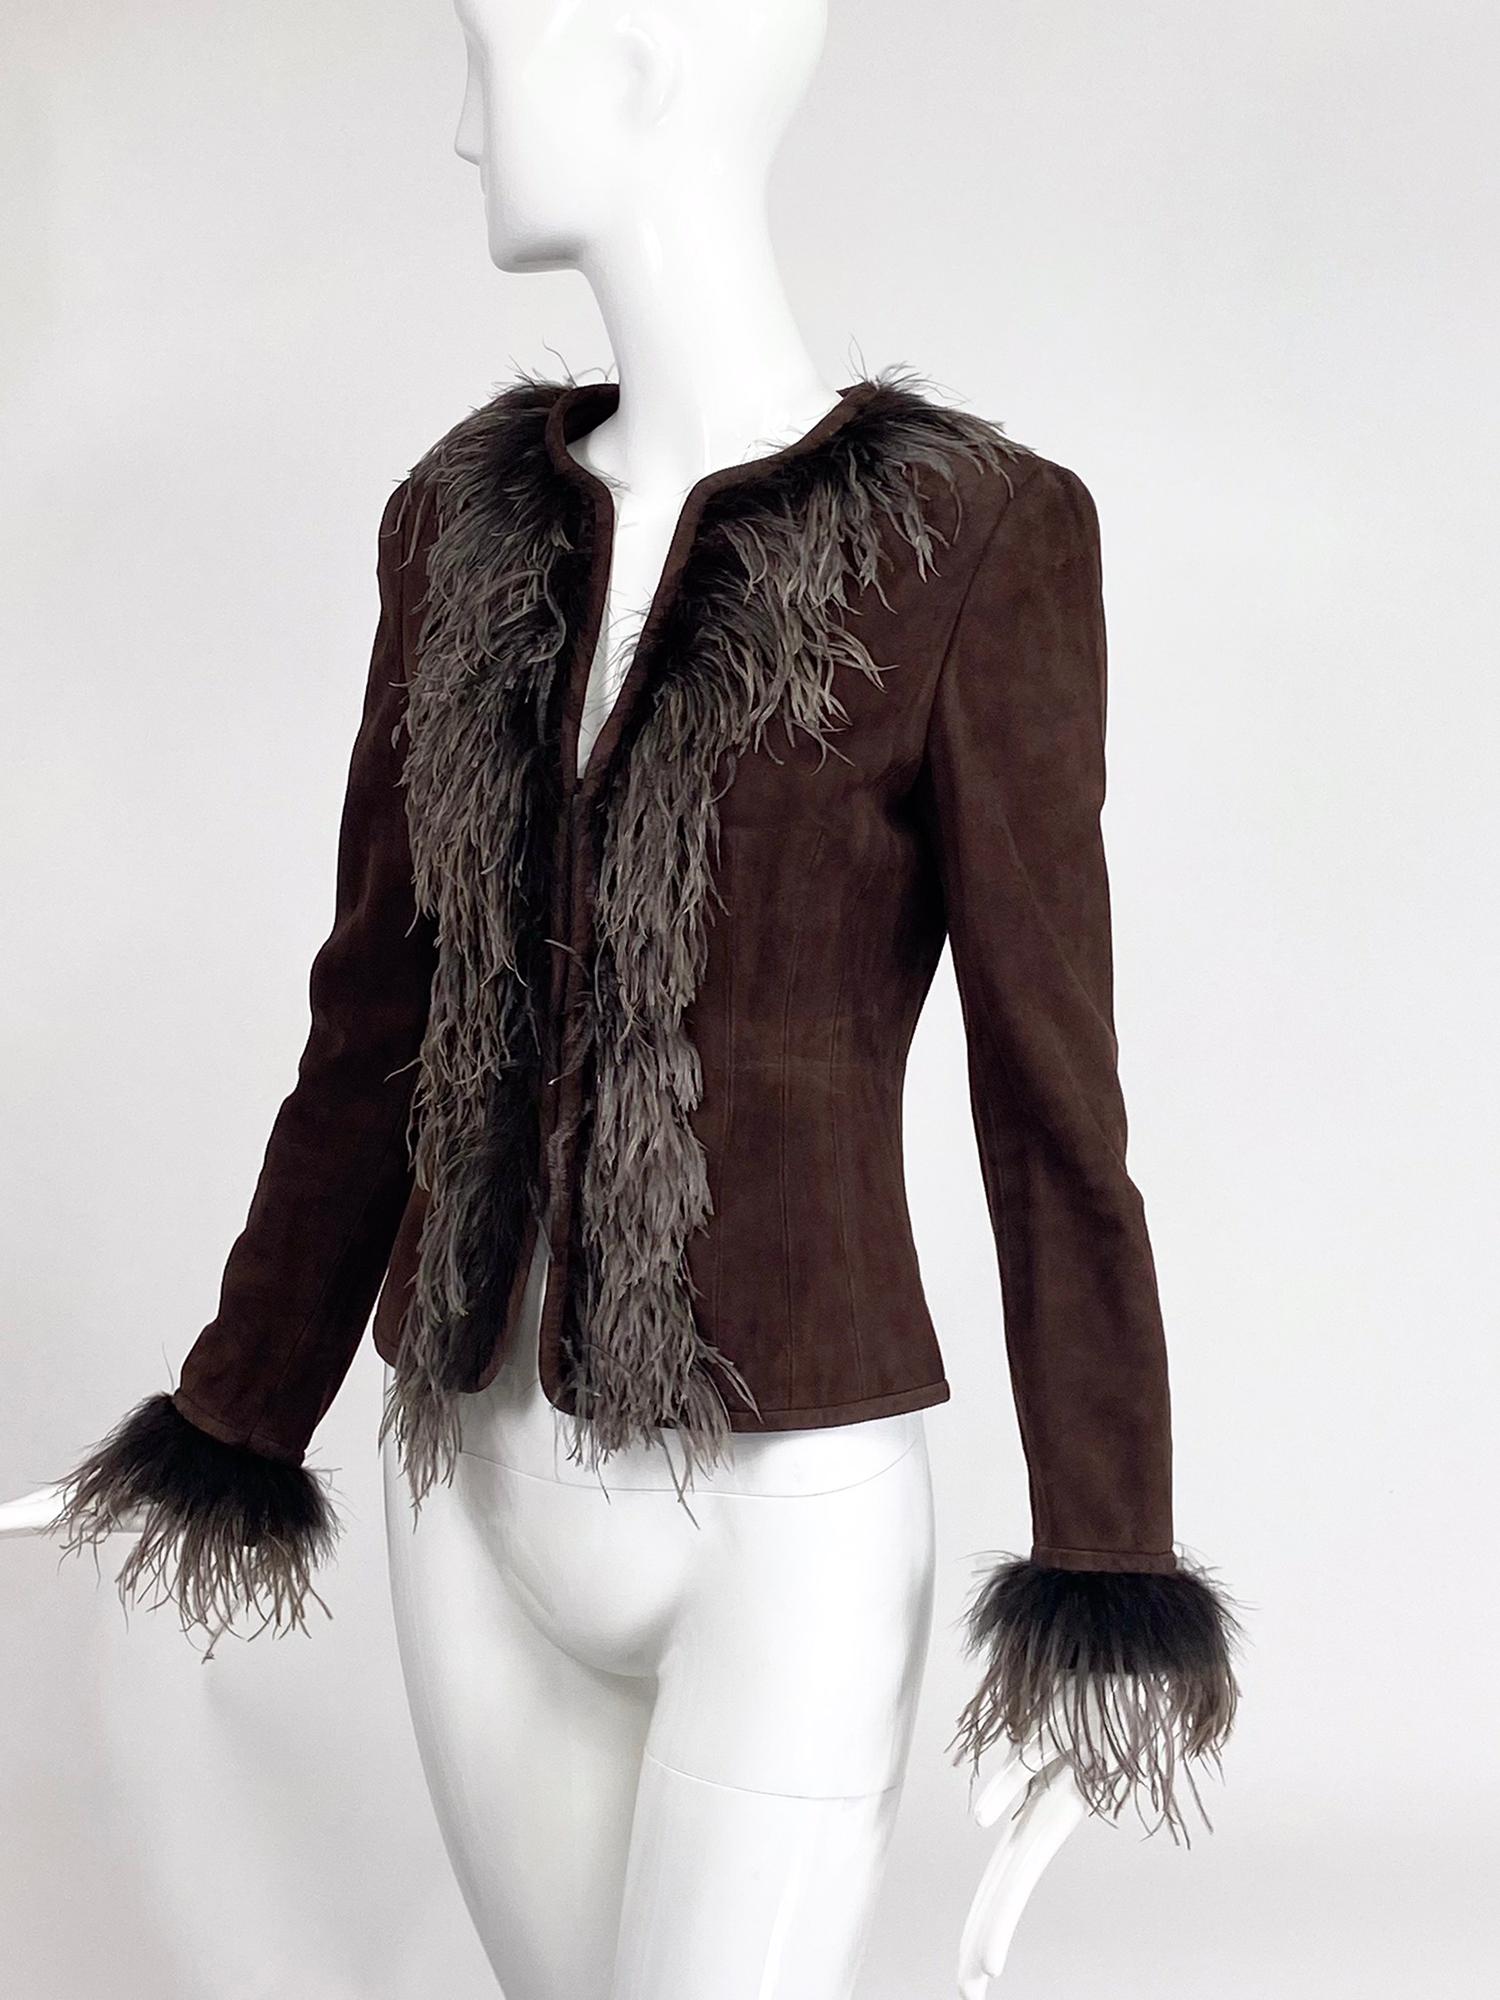 Escada ostrich feather trimmed, chocolate brown goat suede jacket. Princess seamed jacket is trimmed in dark and light ostrich feathers at the cuffs, collar and fronts. The jacket closes at the front with hidden bar hooks. Fully lined in Escada logo